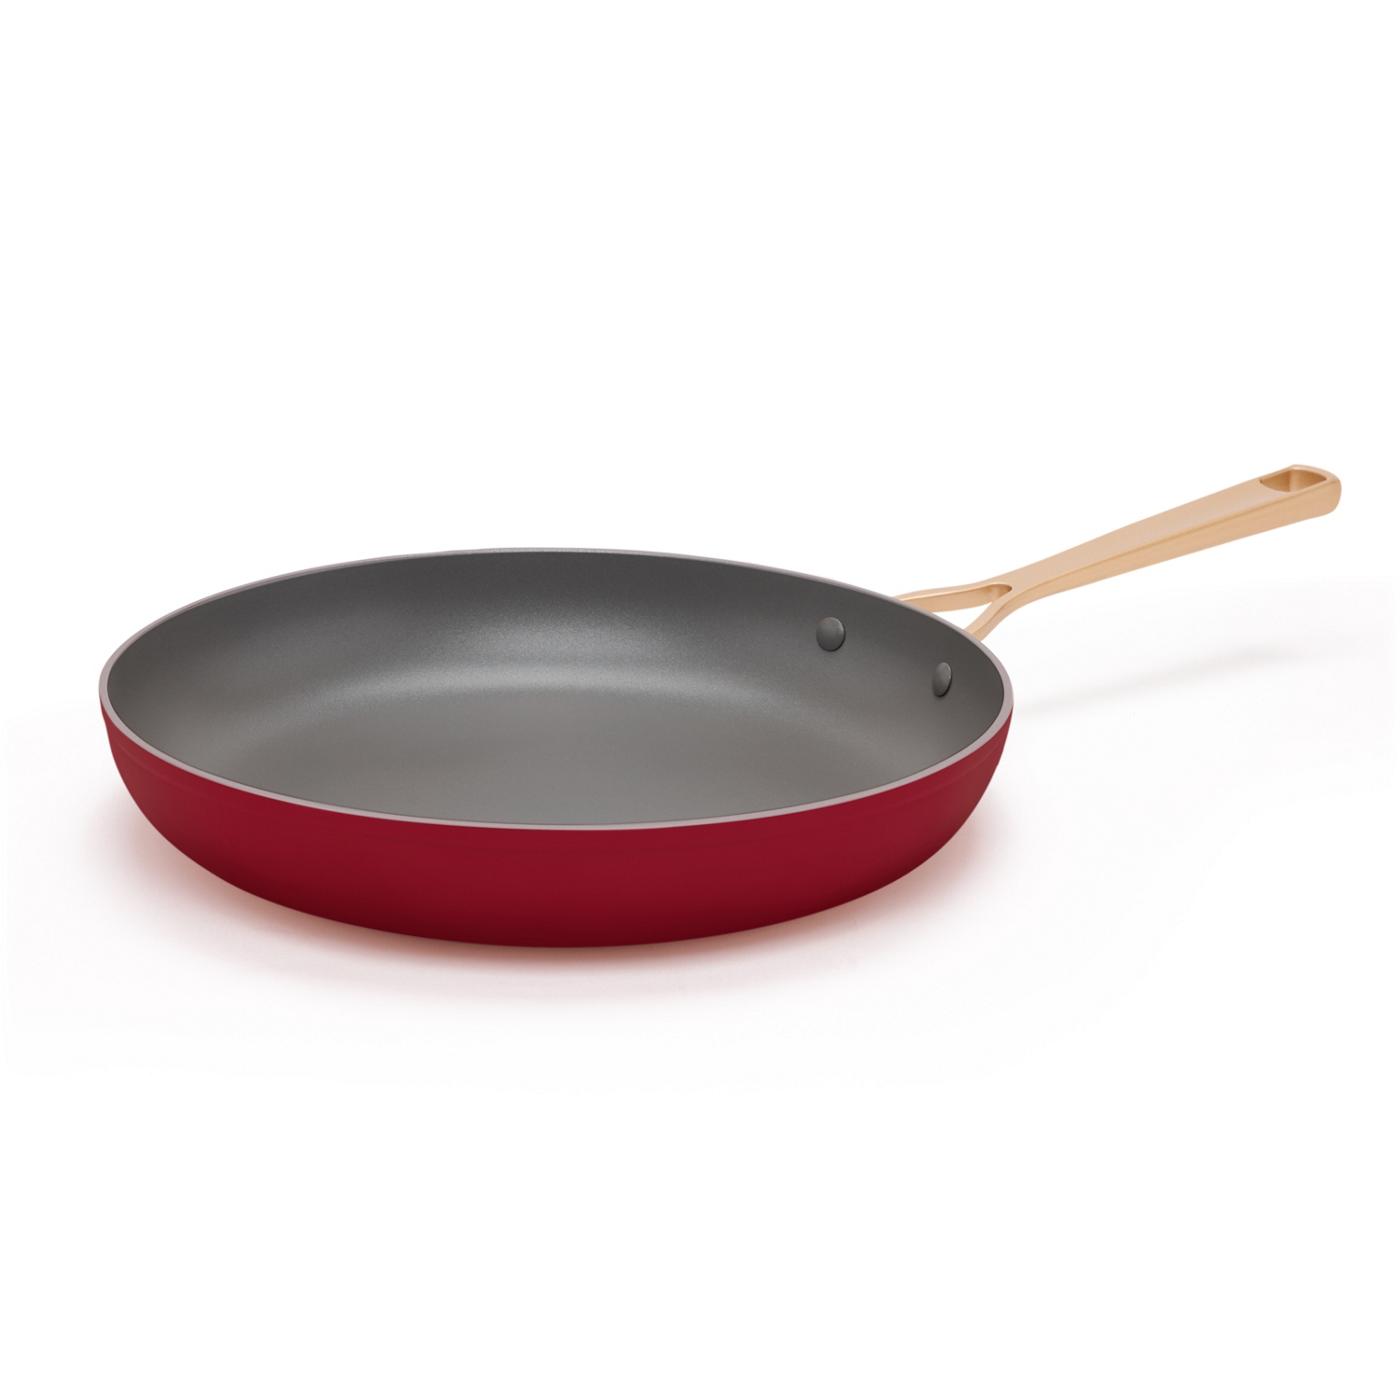 Kitchen & Table by H-E-B Nonstick Fry Pan - Bordeaux Red; image 1 of 6